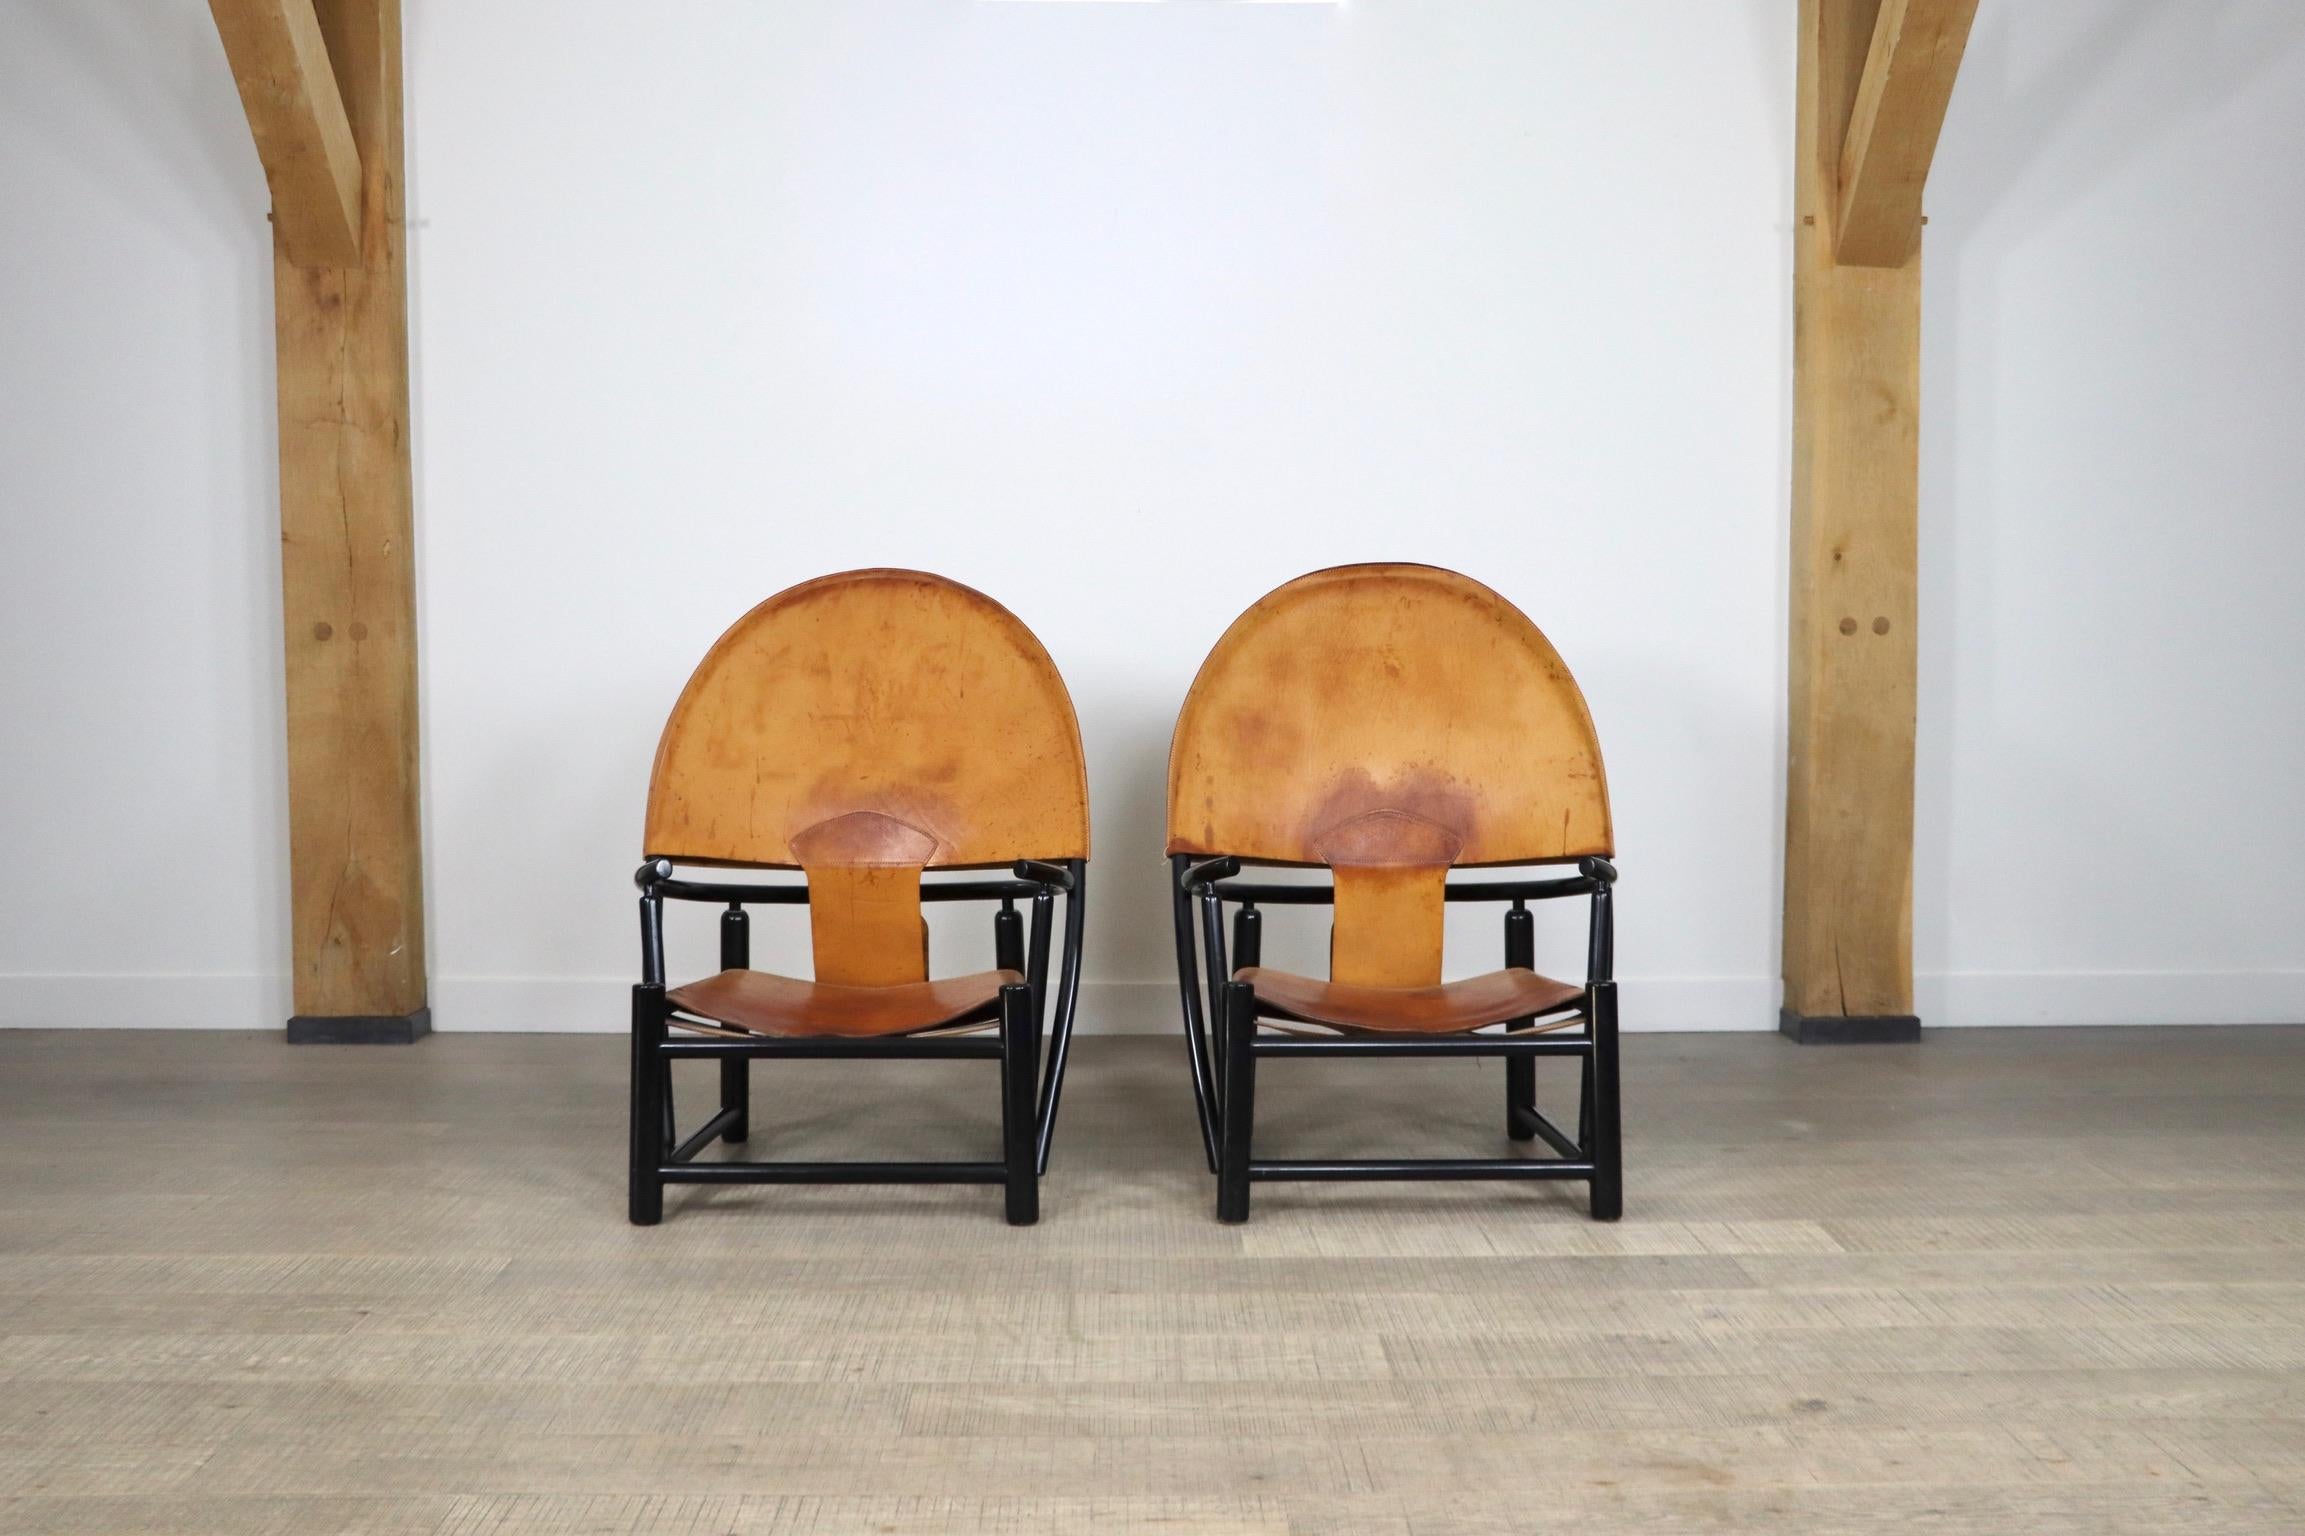 Incredible pair of model G23 lounge chairs, designed by Piero Palange & Werther Toffoloni in original patinated cognac leather upholstery and black laquered wooden frame. 
This high quality chair, with steam bent beech frame, is beautifully designed